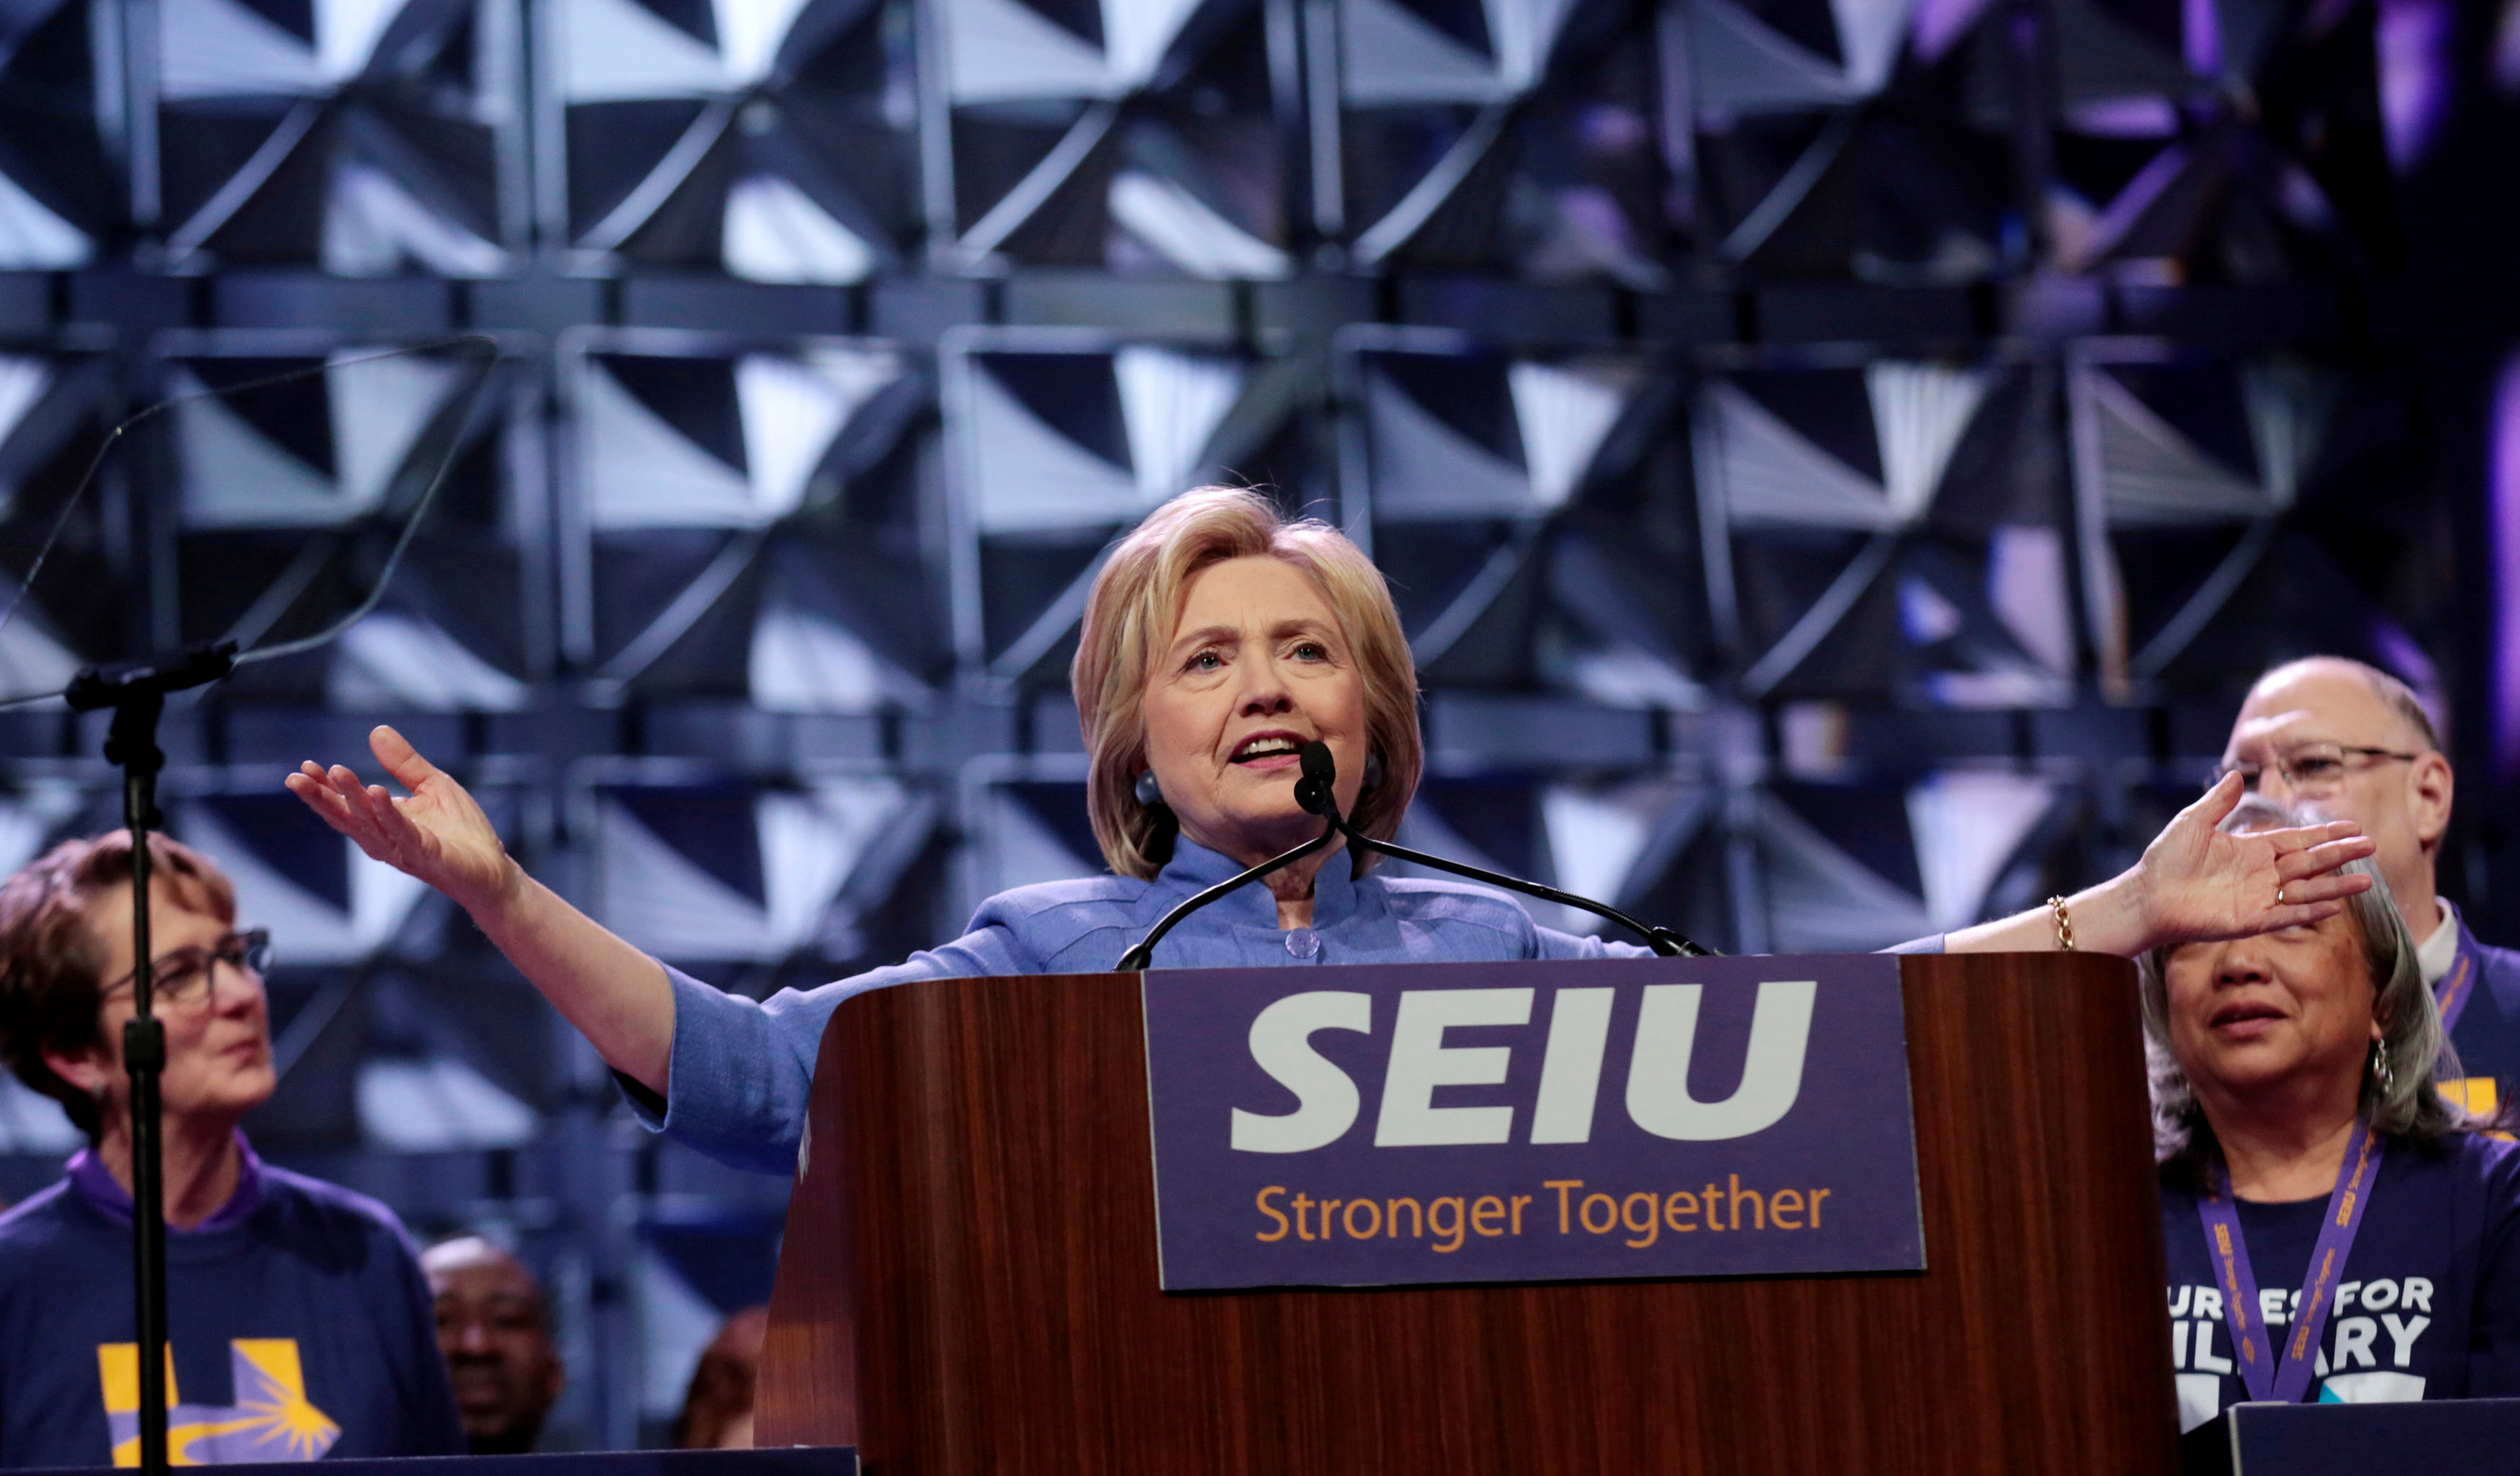 Democratic presidential candidate Hillary Clinton addresses Service Employees Union members at the union's 2016 International Convention in Detroit, Michigan, May 23, 2016. REUTERS/Rebecca Cook